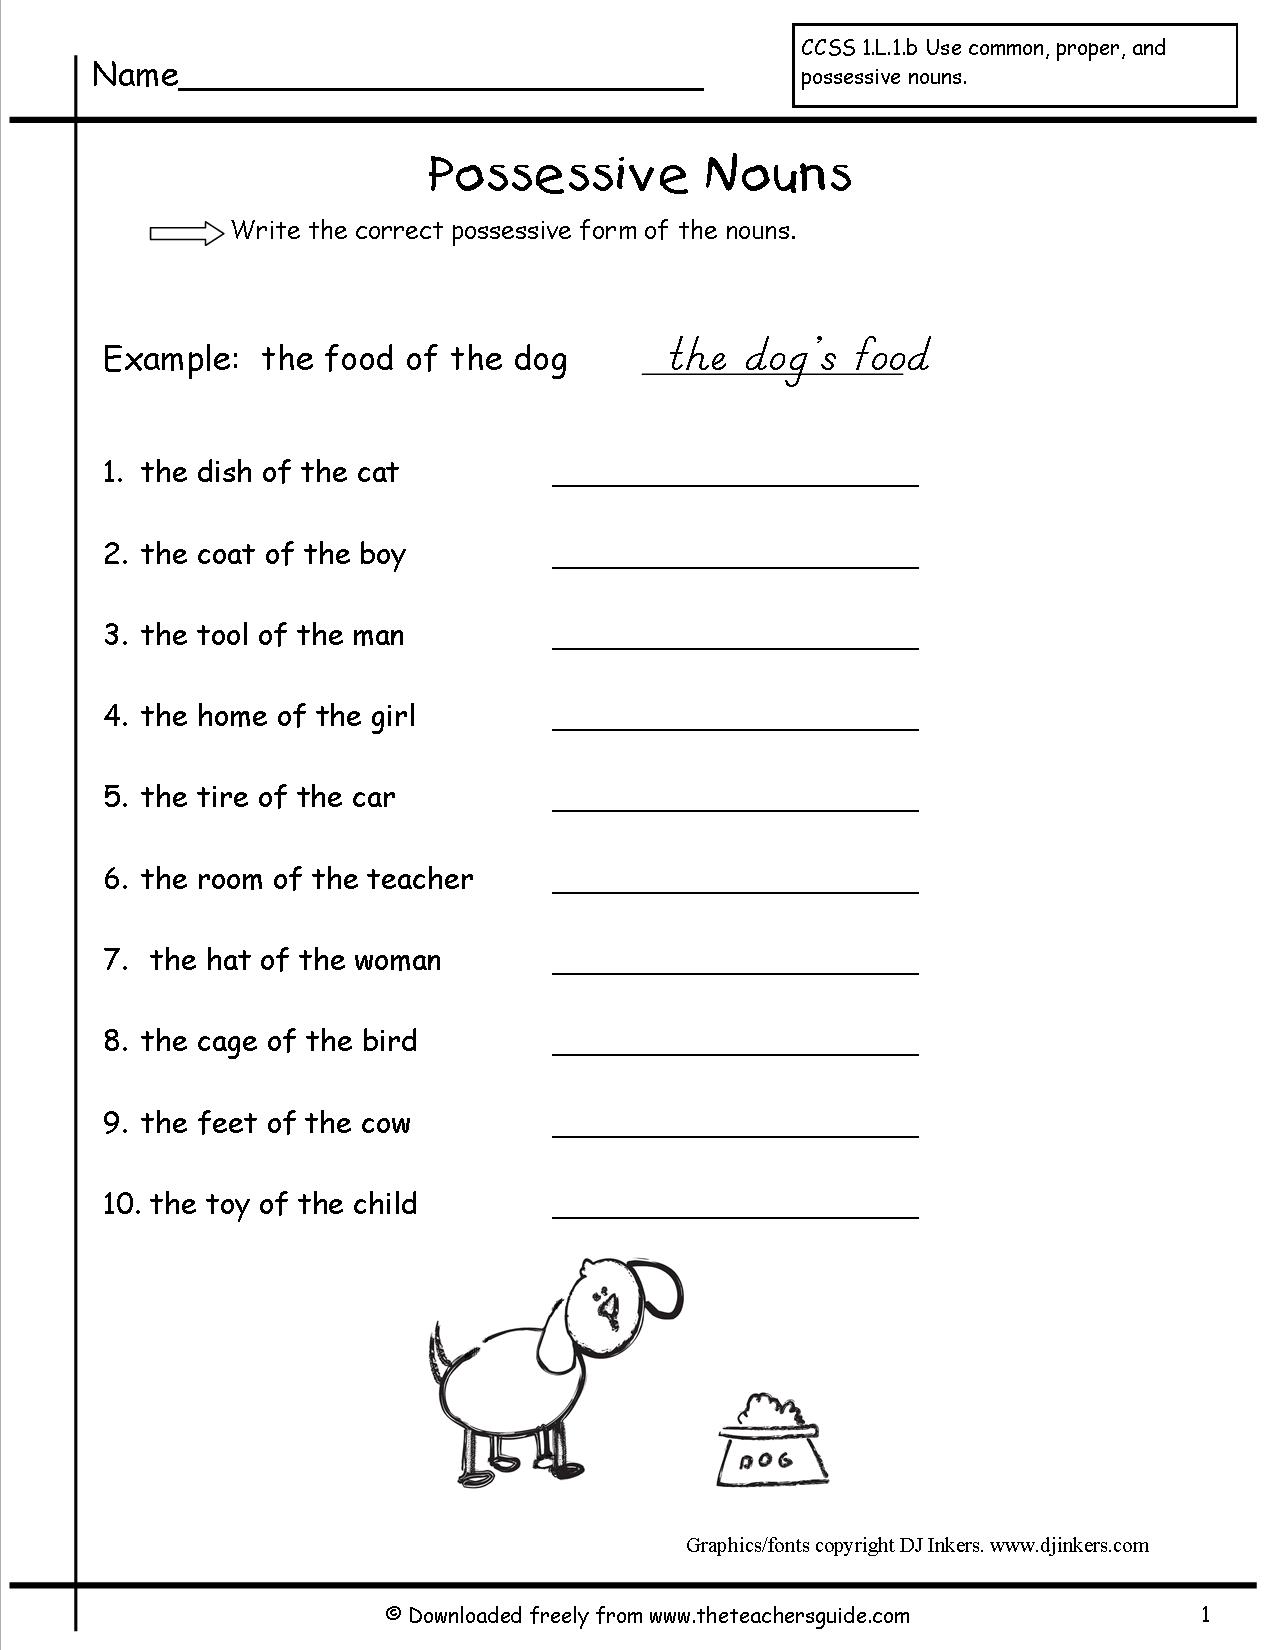 15-best-images-of-printable-pronoun-worksheets-4th-grade-reflexive-pronouns-worksheet-4th